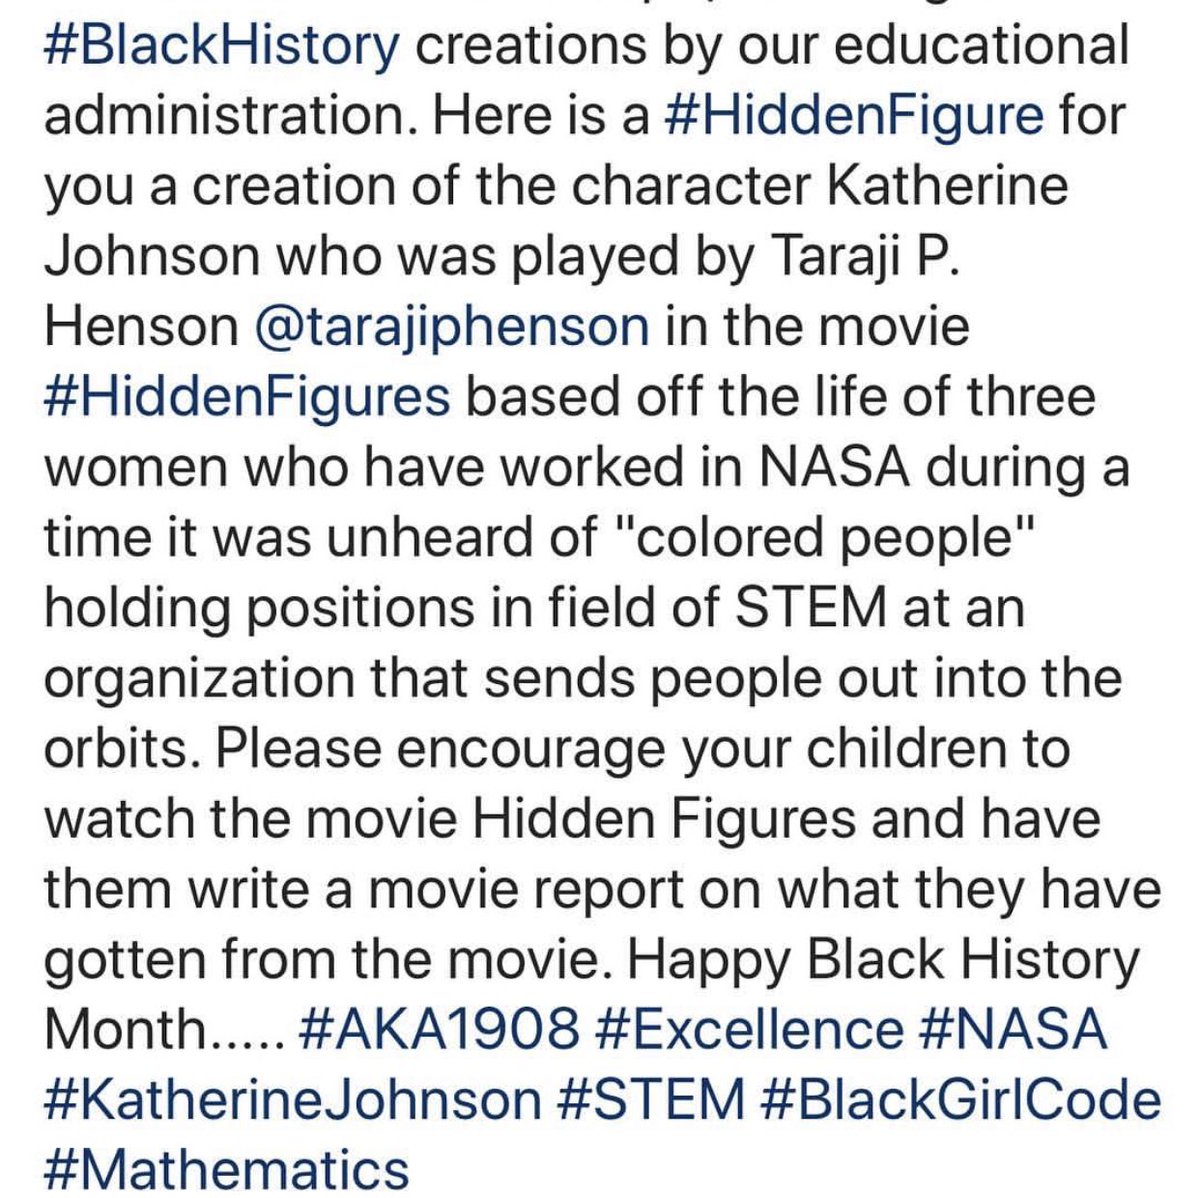 FCHS celebrates Black History month with this year’s theme focusing on #EducationalEquality ~ this week’s focus was on #LevelingThePlayingField. We celebrated #Sheros this week, such as #MrsKatherineJohnson, a #HiddenFigure no more! #ExcellenceInAllWeDo #TigerPride